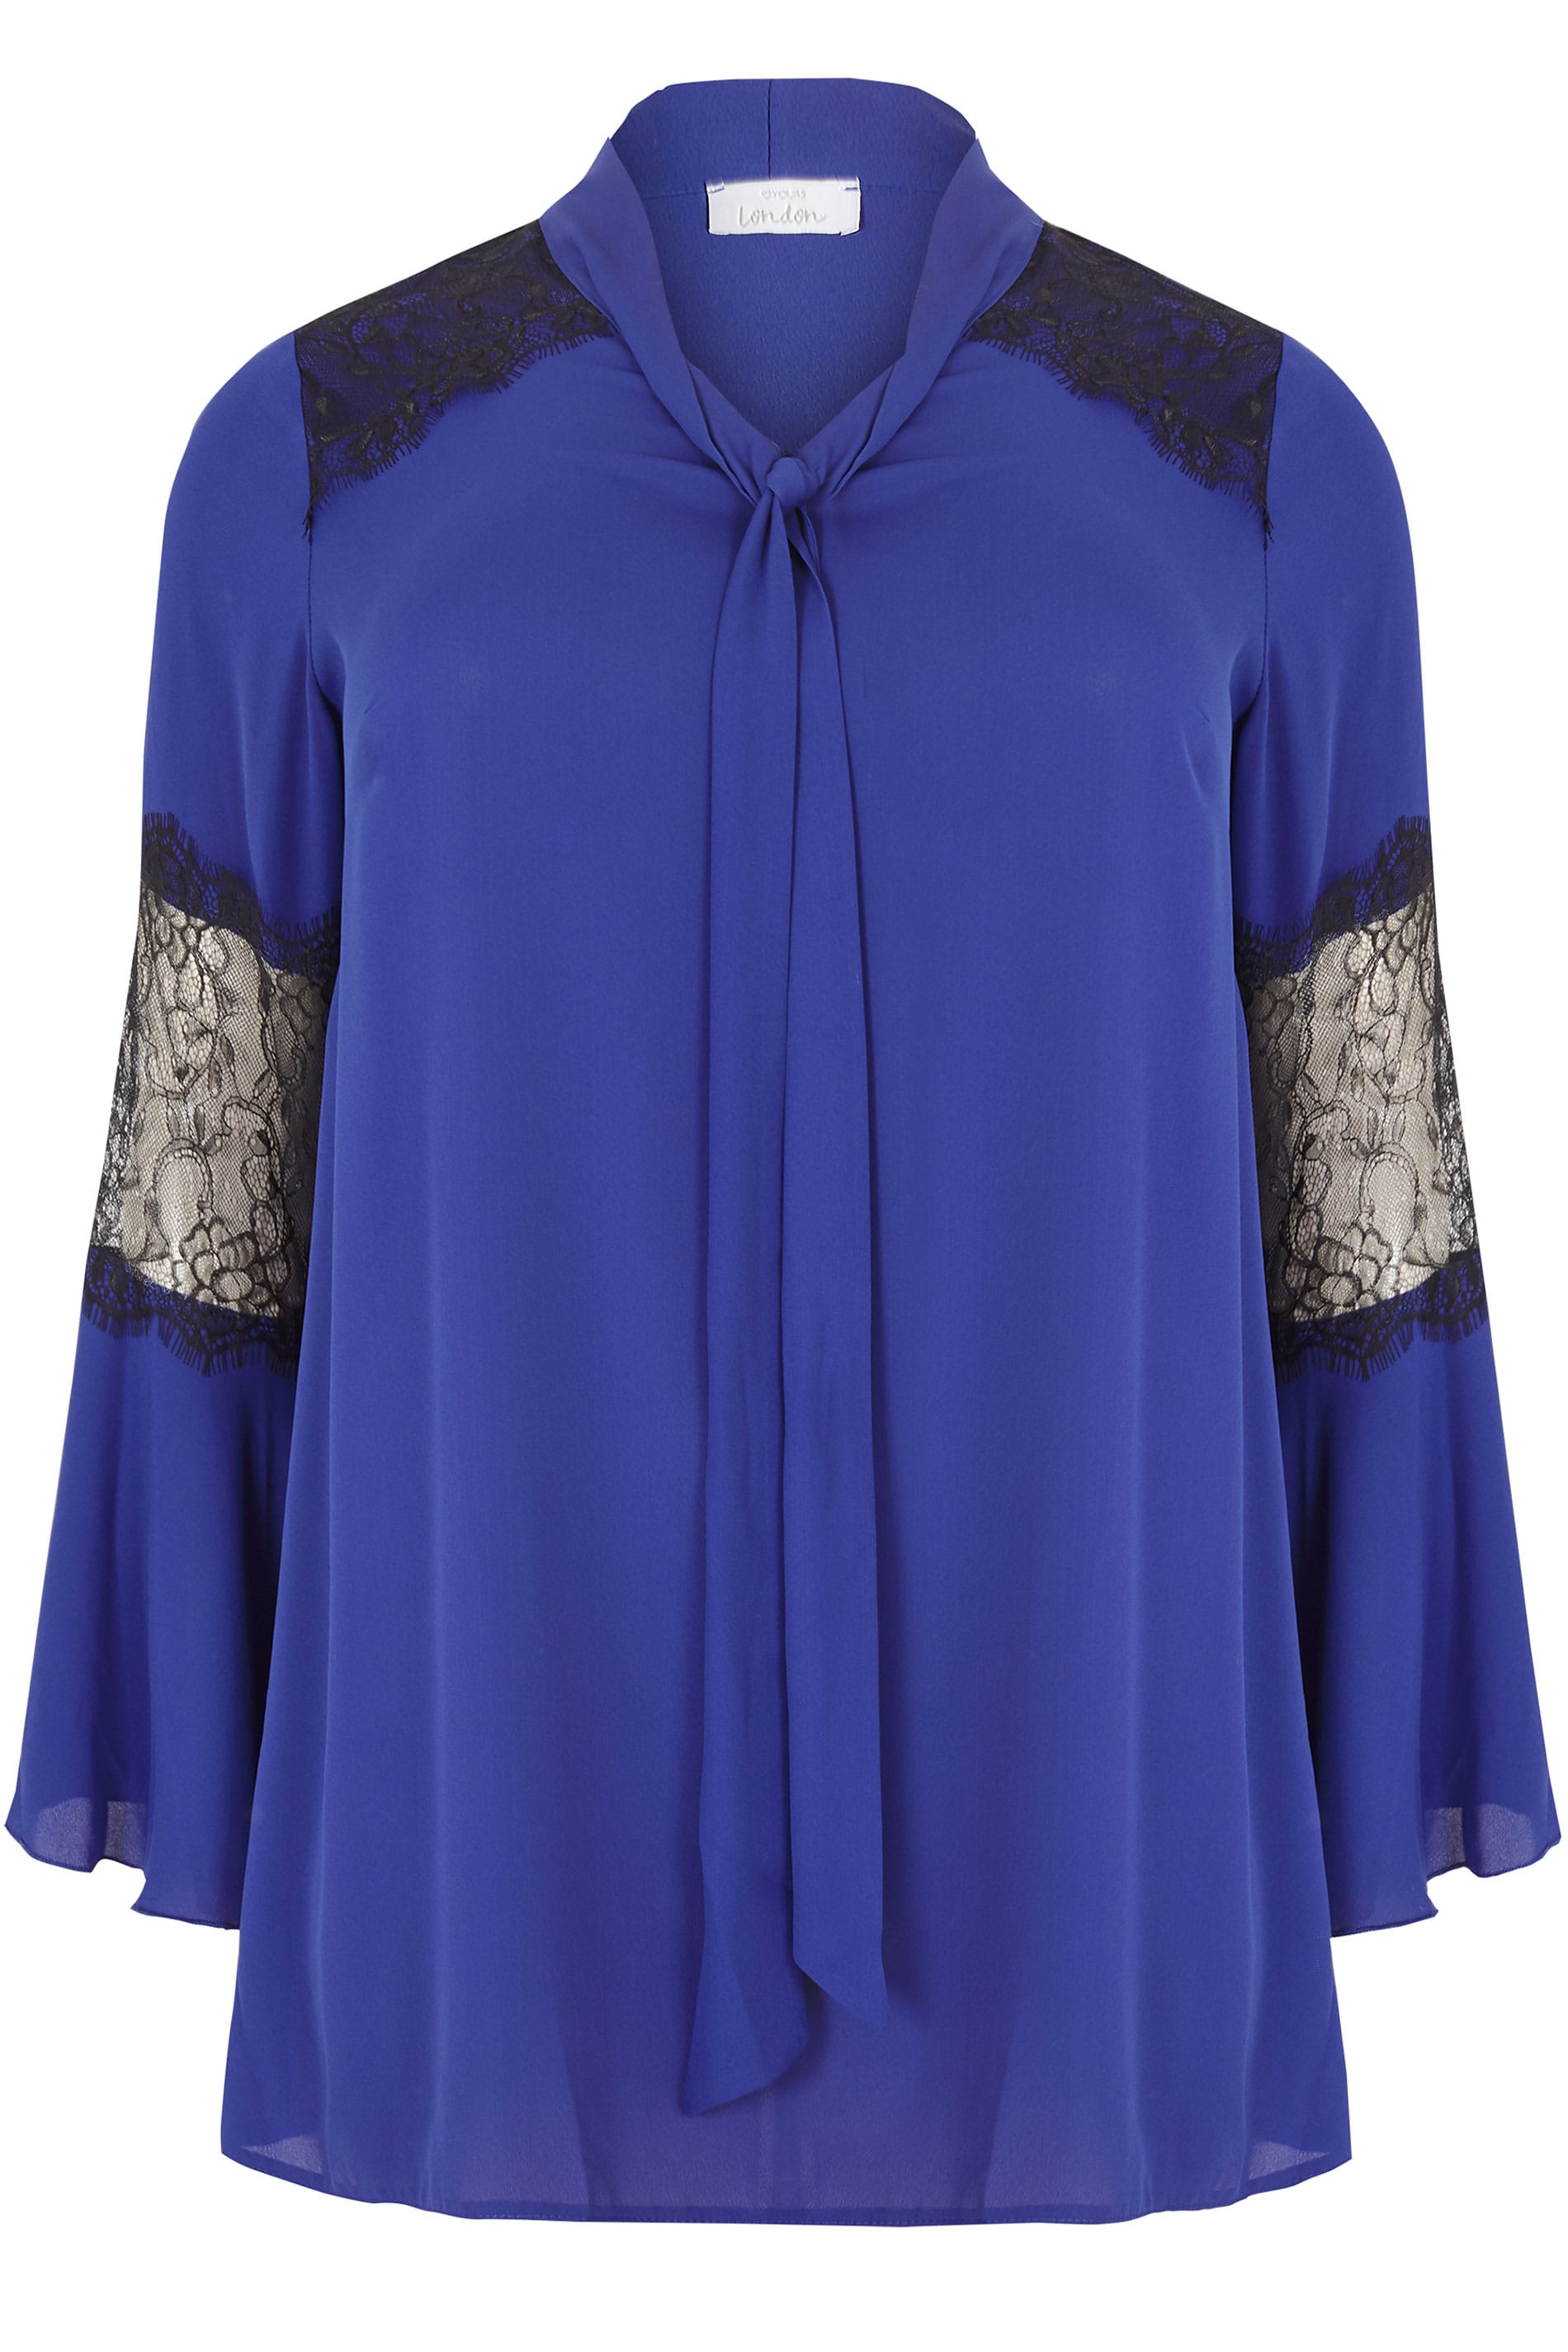 YOURS LONDON Cobalt Blue Pussy Bow Chiffon Blouse, plus size 16 to 32